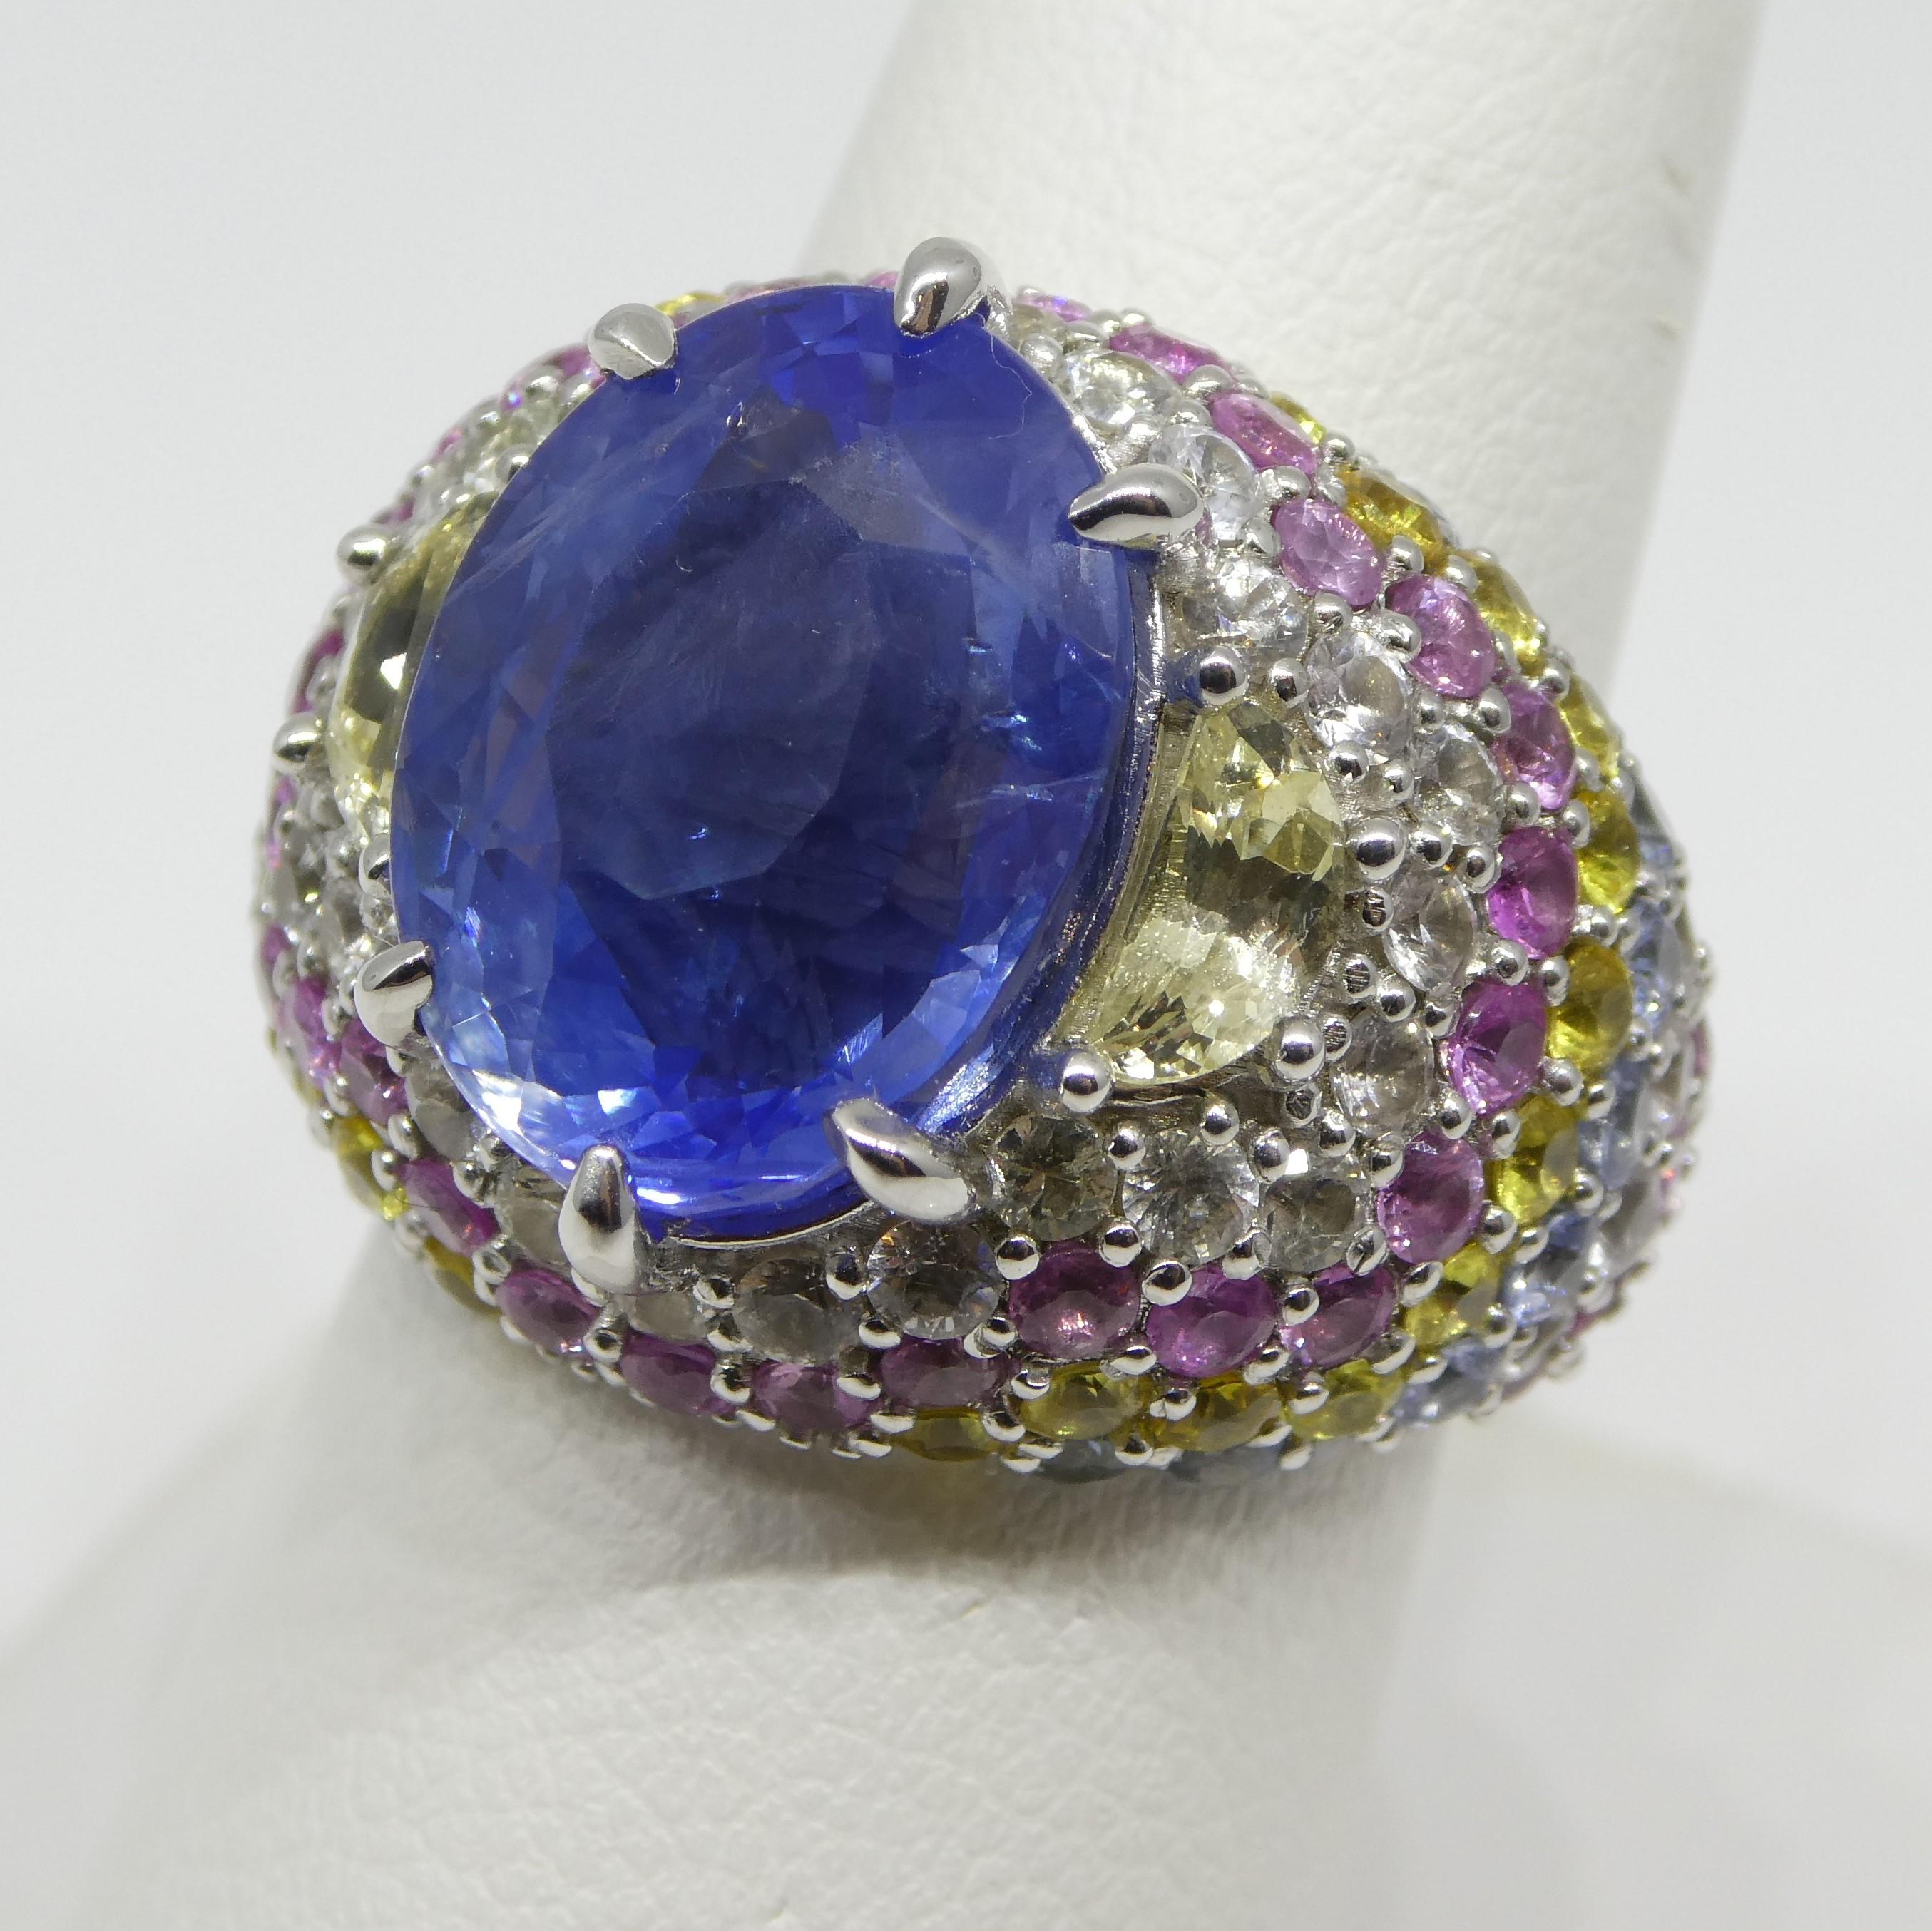 10.03ct Unheated Blue Sapphire Cluster Ring in 18k White Gold 11